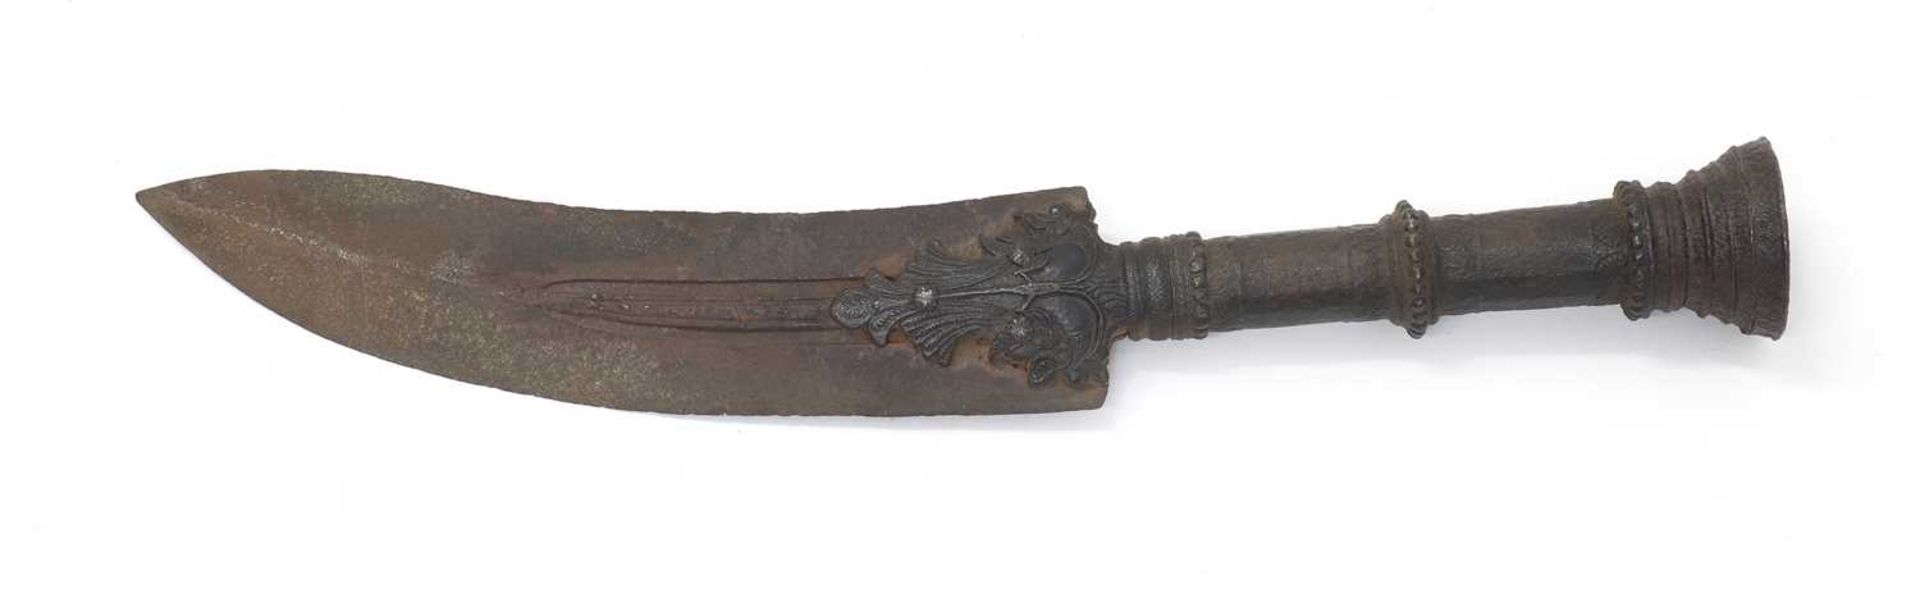 A steel spearhead, - Image 3 of 3